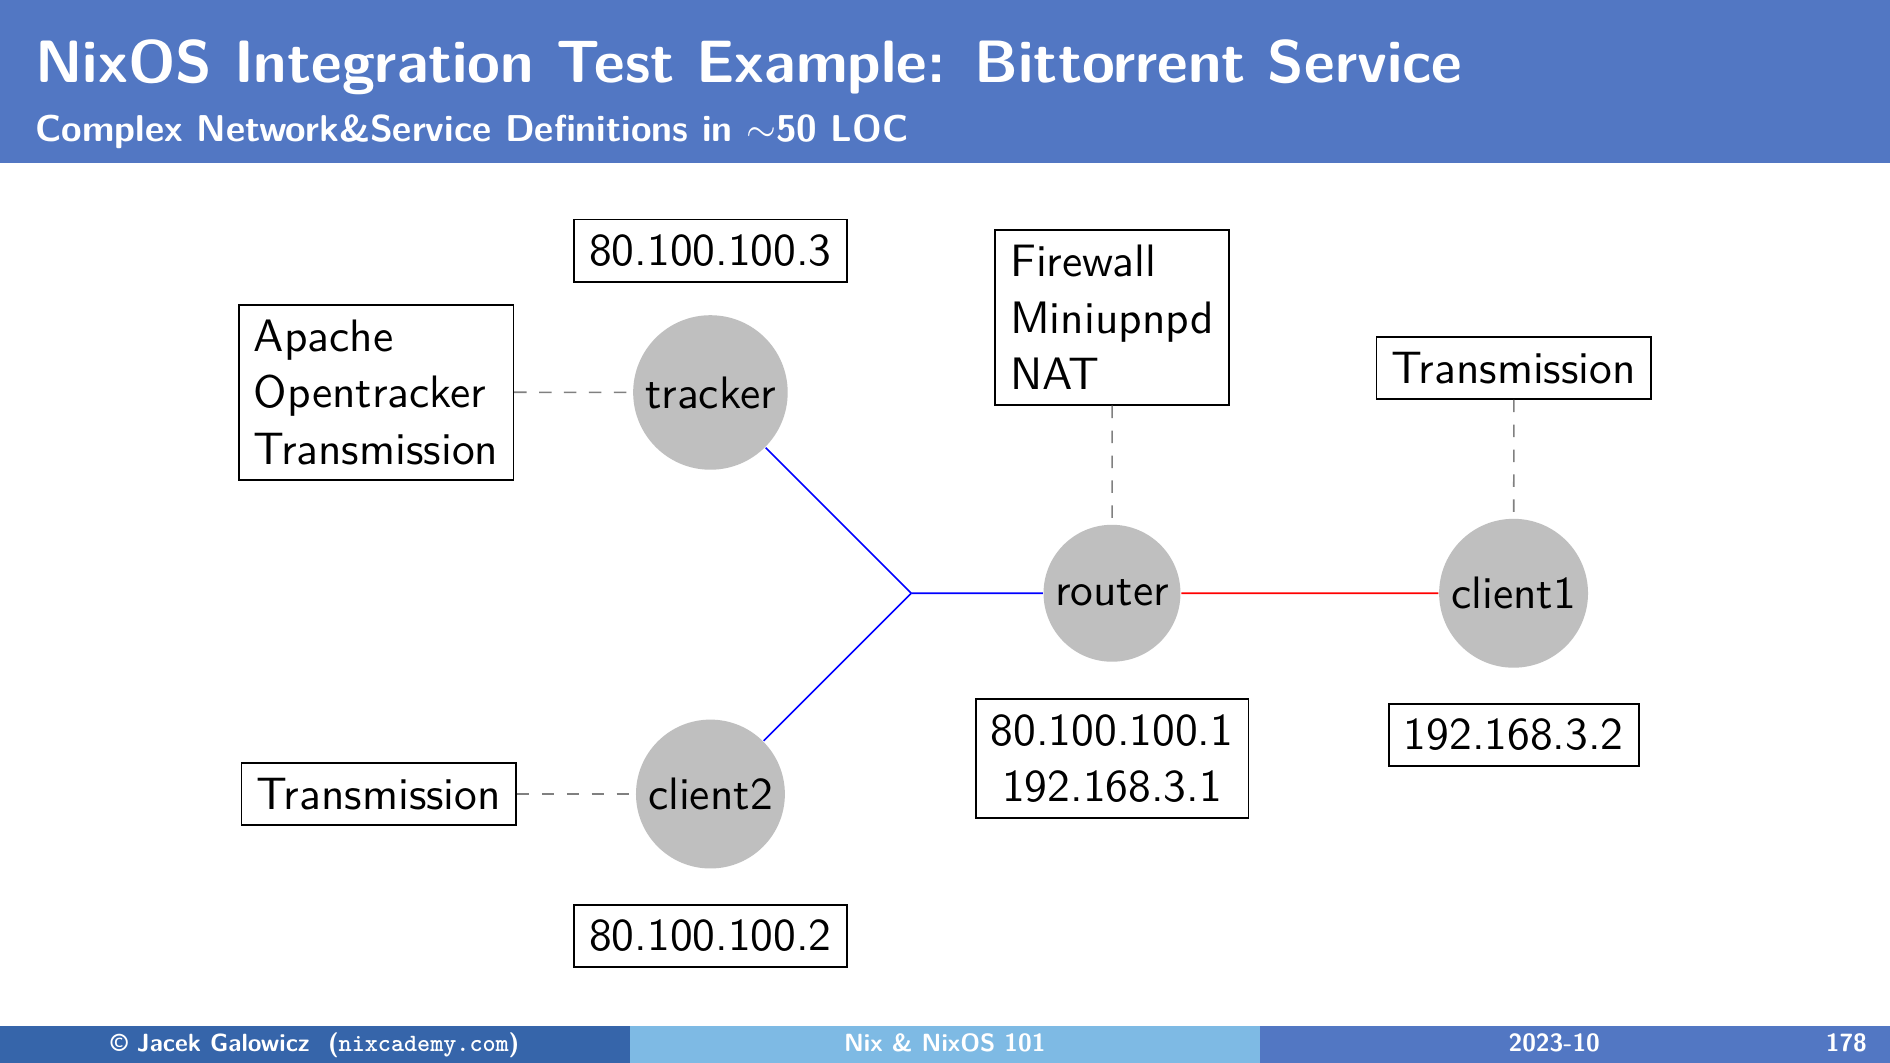 Diagram of the Virtual Infrastructure of the BitTorrent Test in the NixOS Project